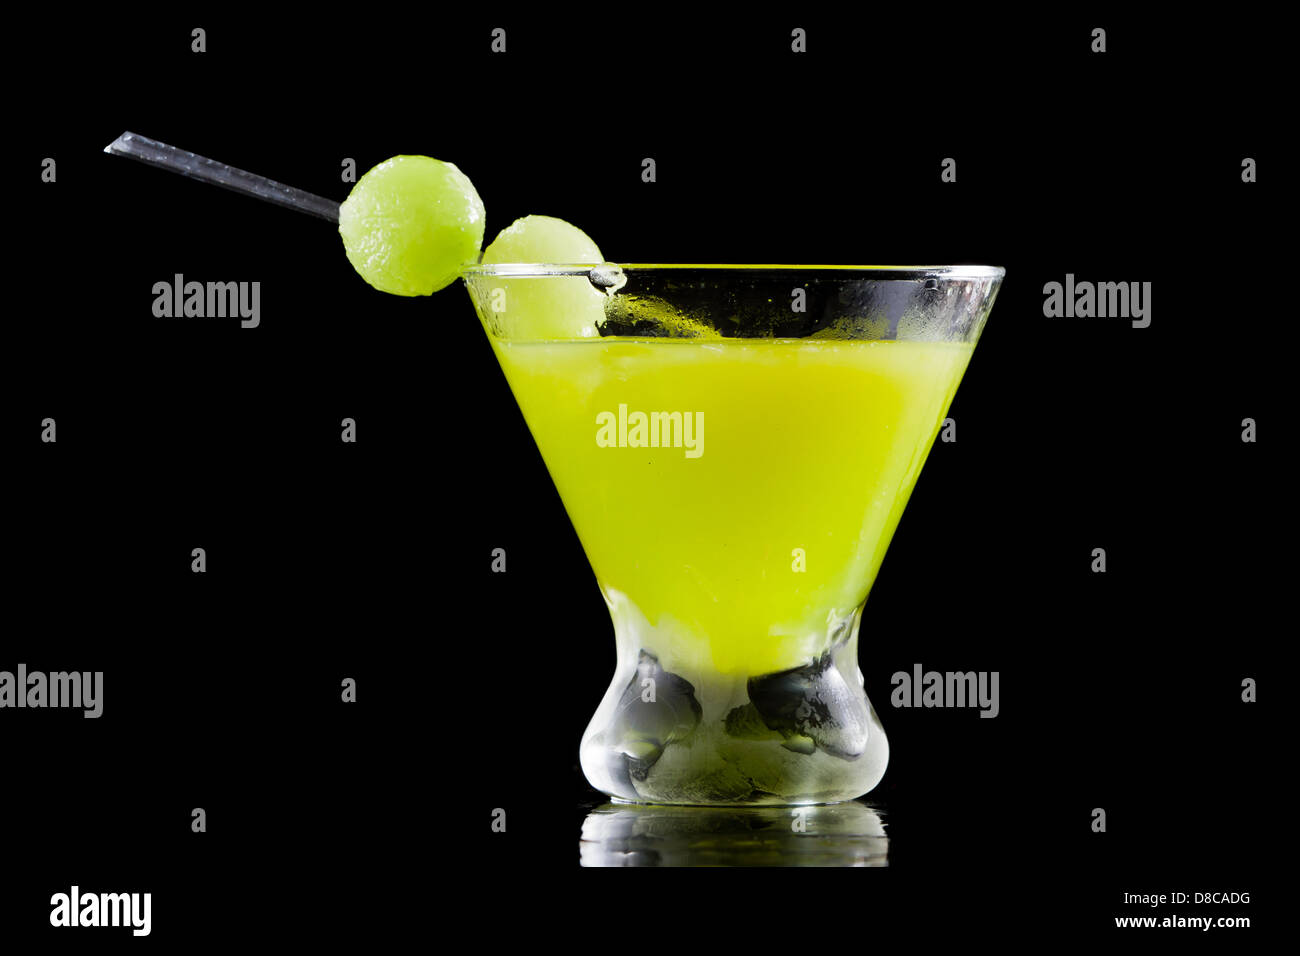 melon ball cocktail served in a stemless martini glass isolated on a black background Stock Photo